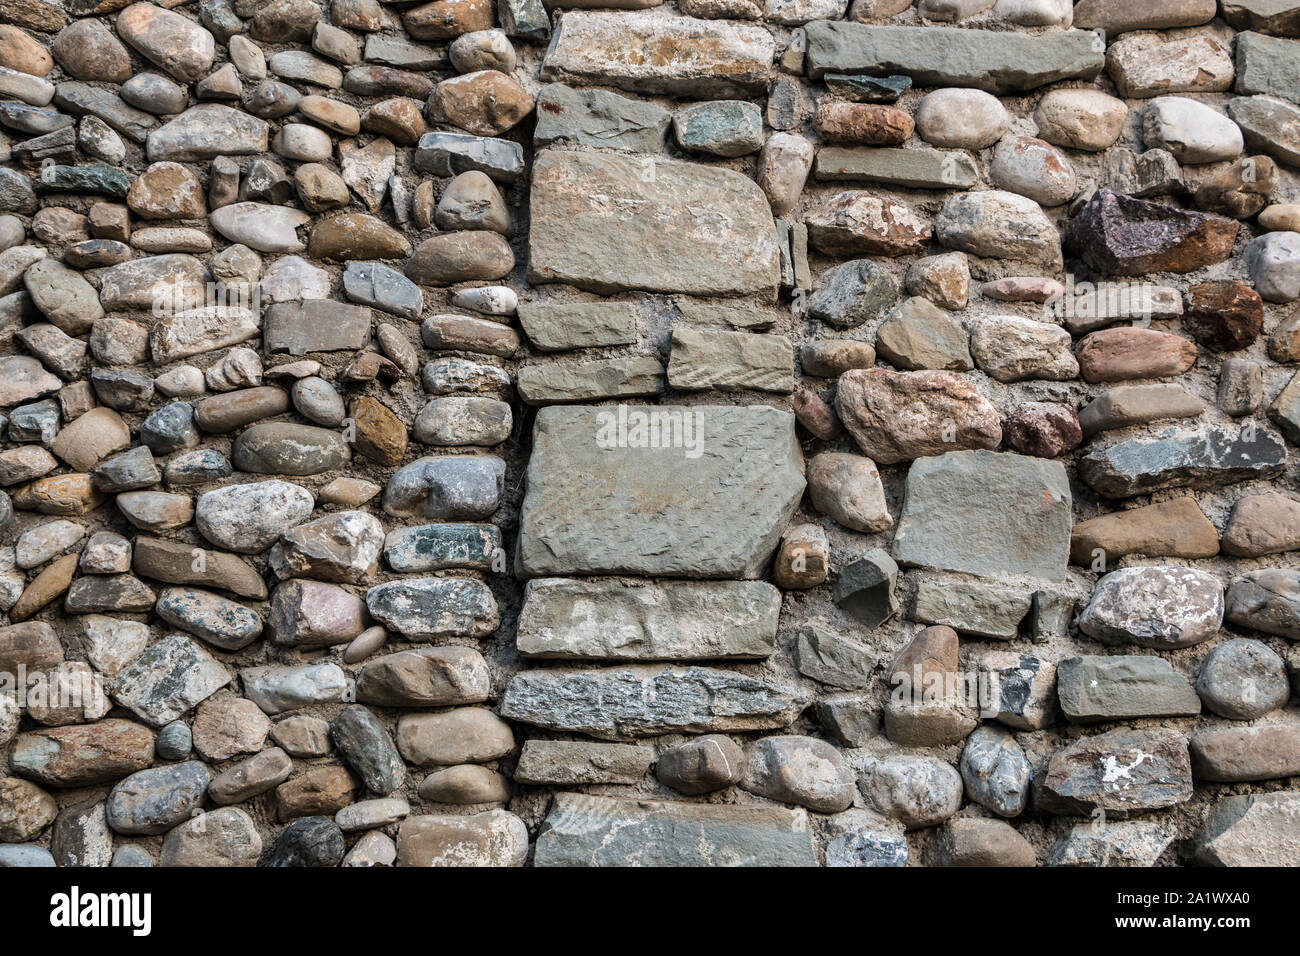 Natural stone wall with colorful and different sized stones Stock Photo